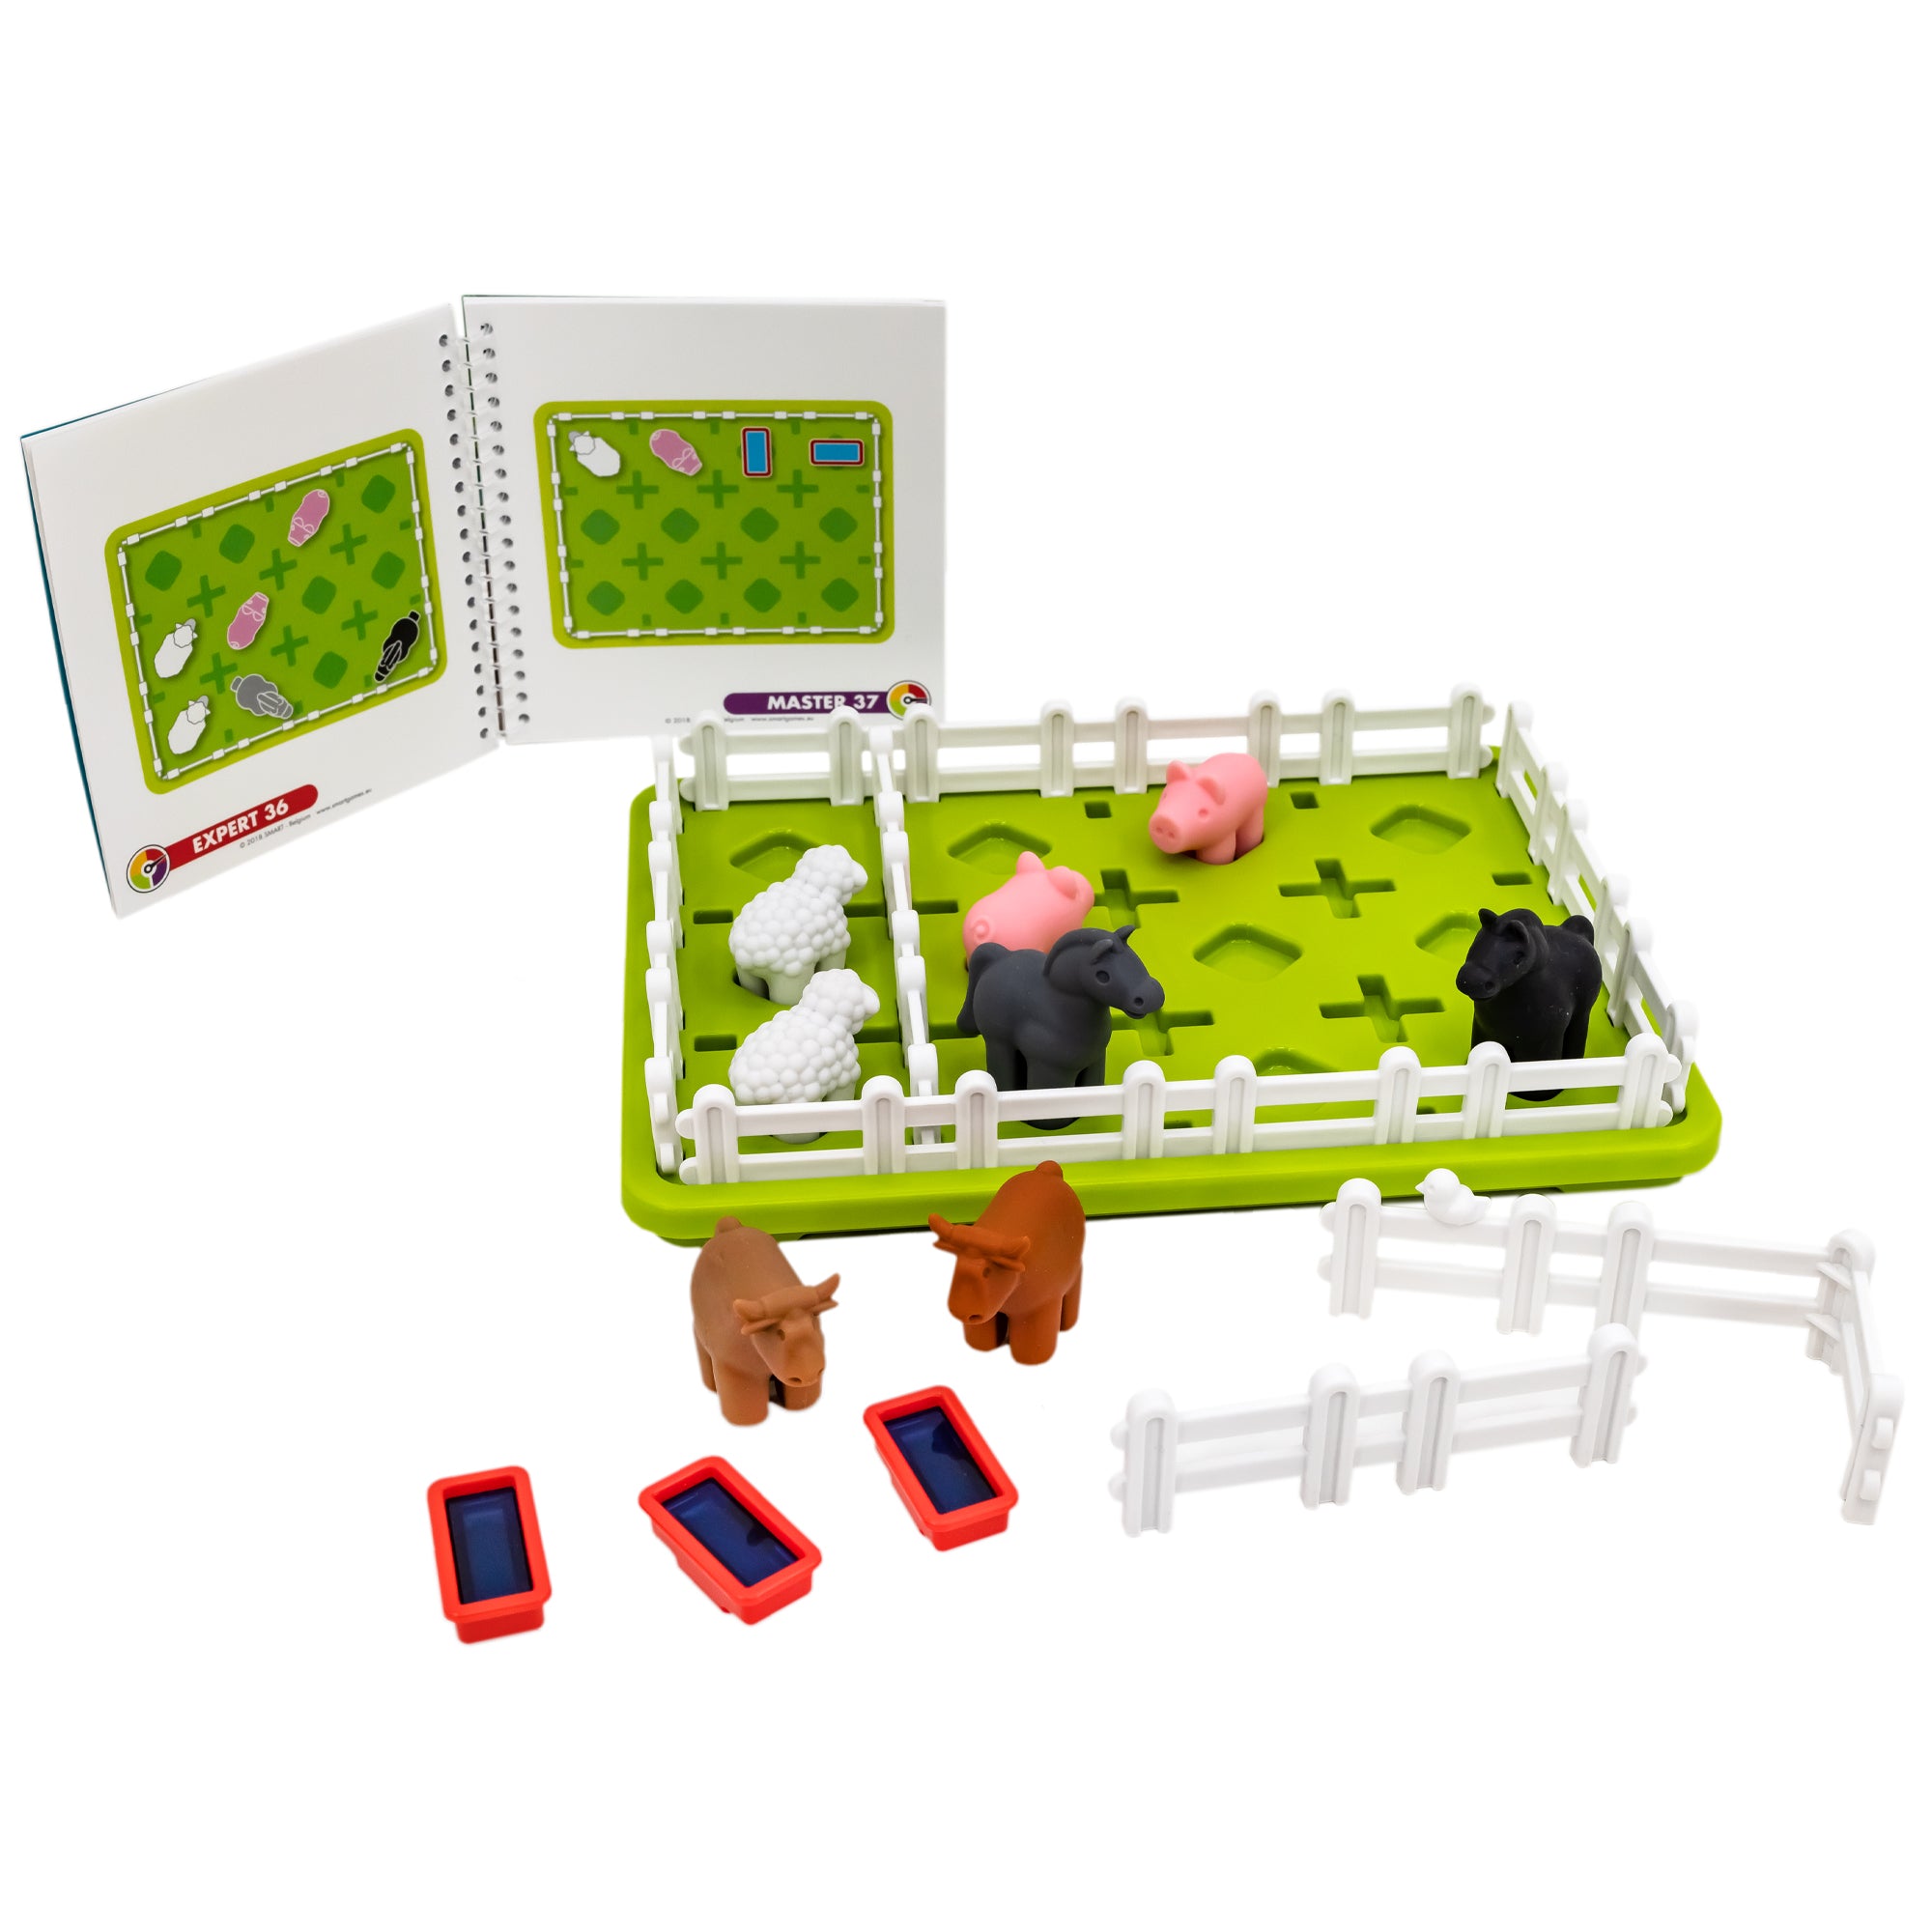 Smart Farmer game components. The game board is green and rectangle-shaped with white fence pieces all around the edge and a couple in the middle. You can see pigs, sheep, and horses inside the fence. Off to the side are 2 cows, more fence pieces, and 3 water dishes. In the back, to the left, is the instruction manual showing 2 challenges.